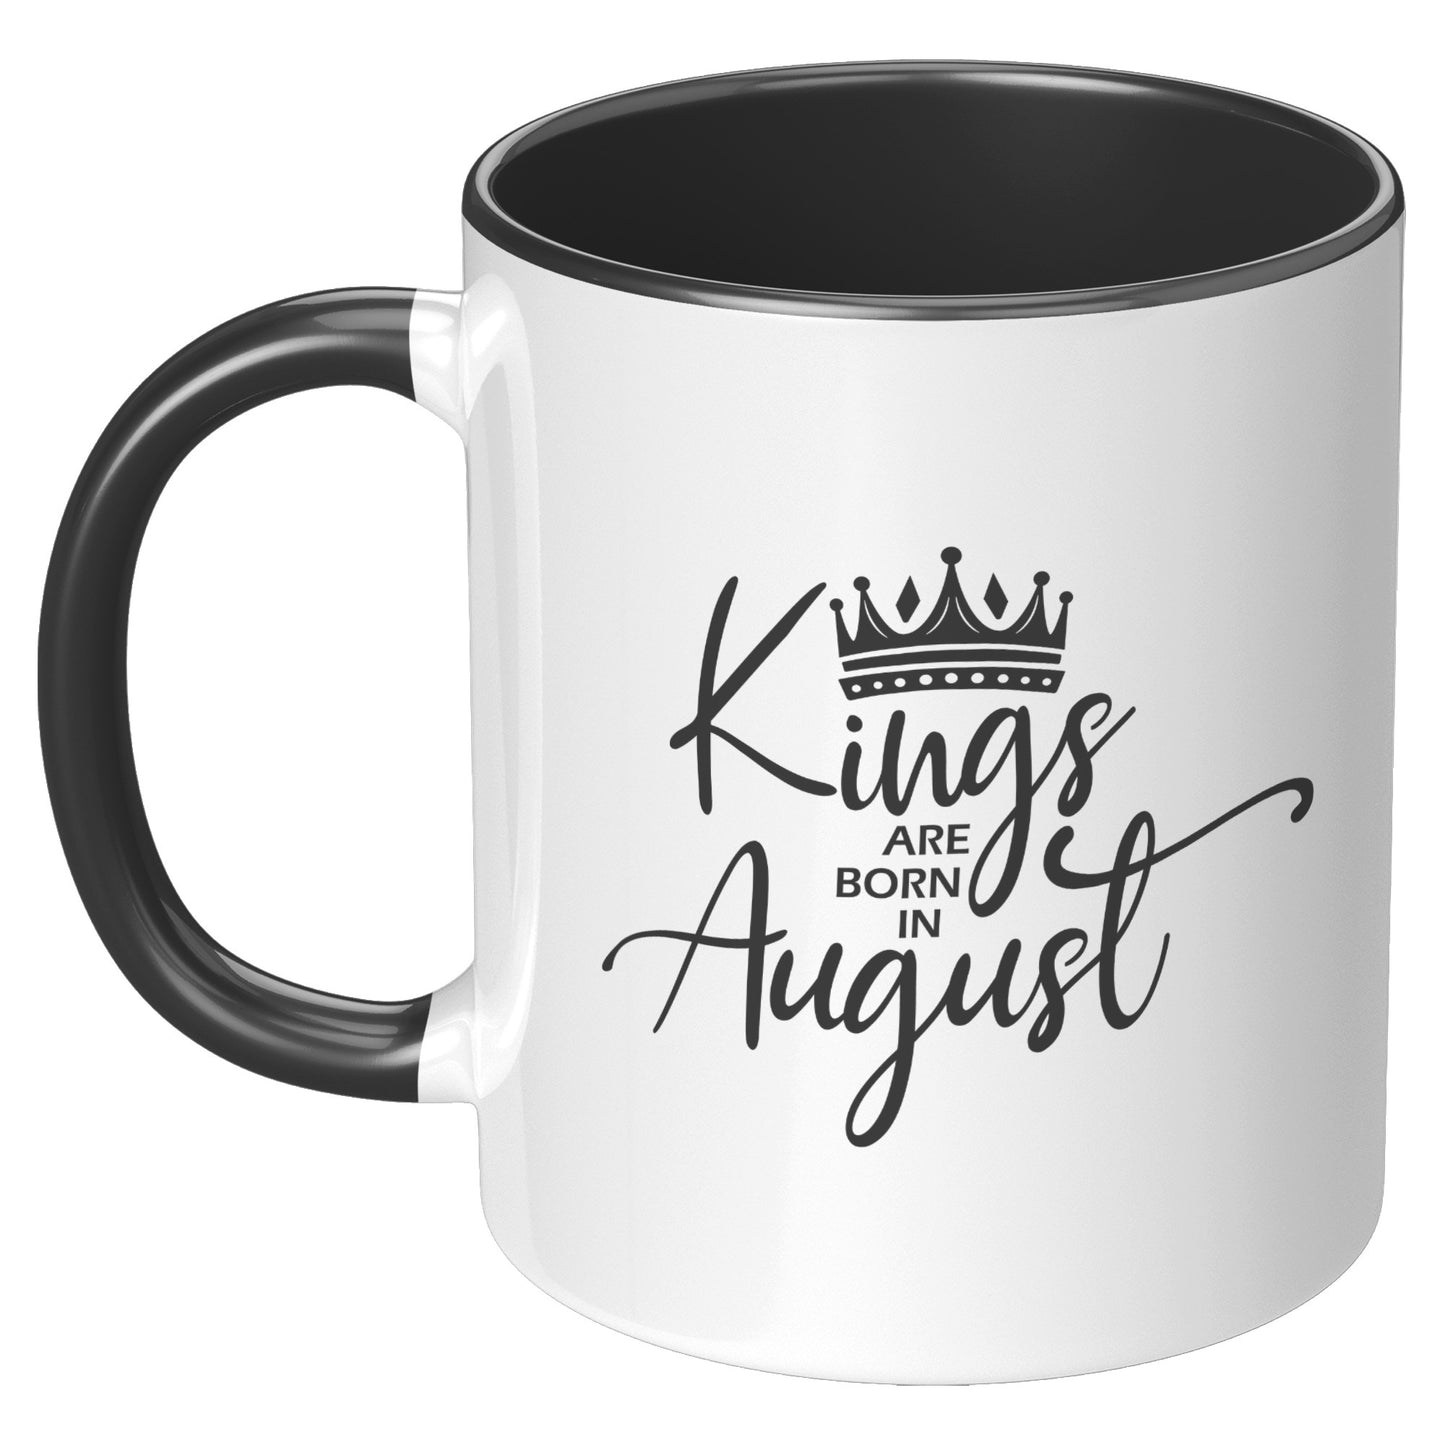 Kings are Born in August Mug